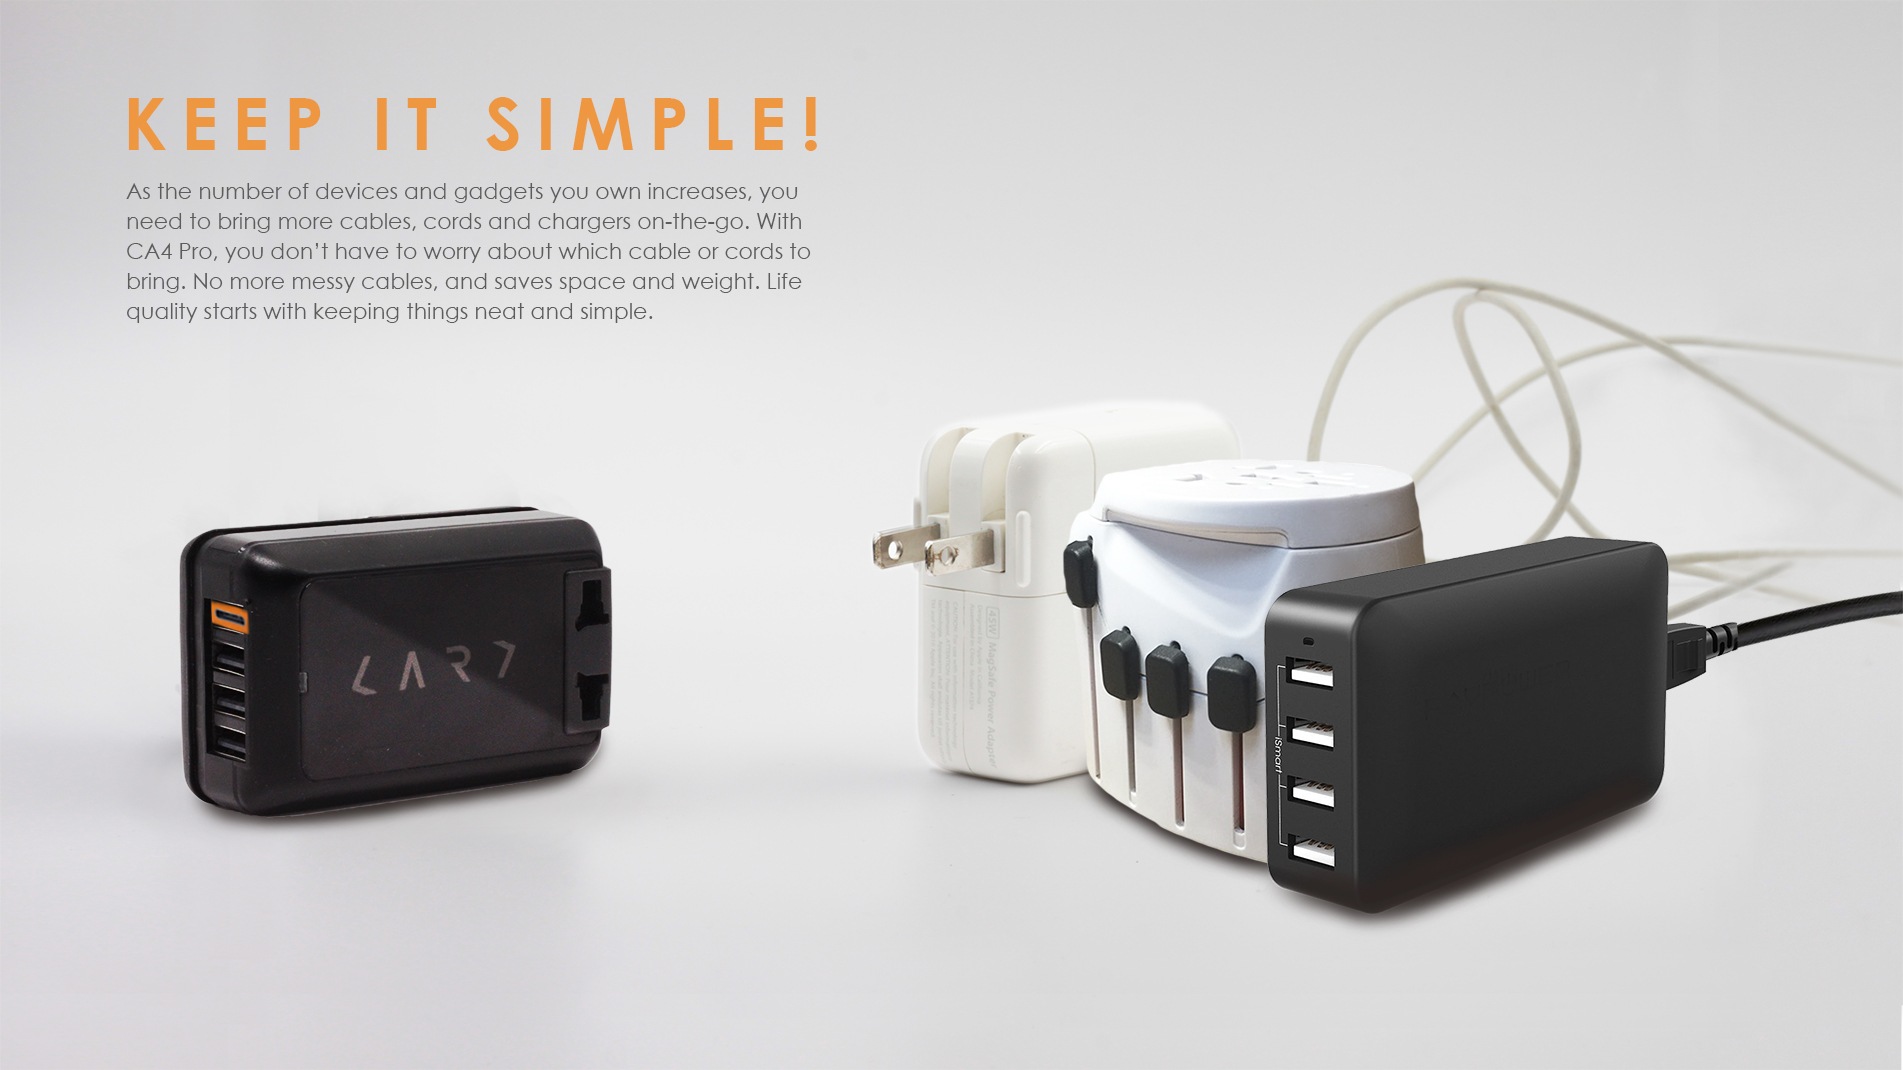 card 4 travel adapter